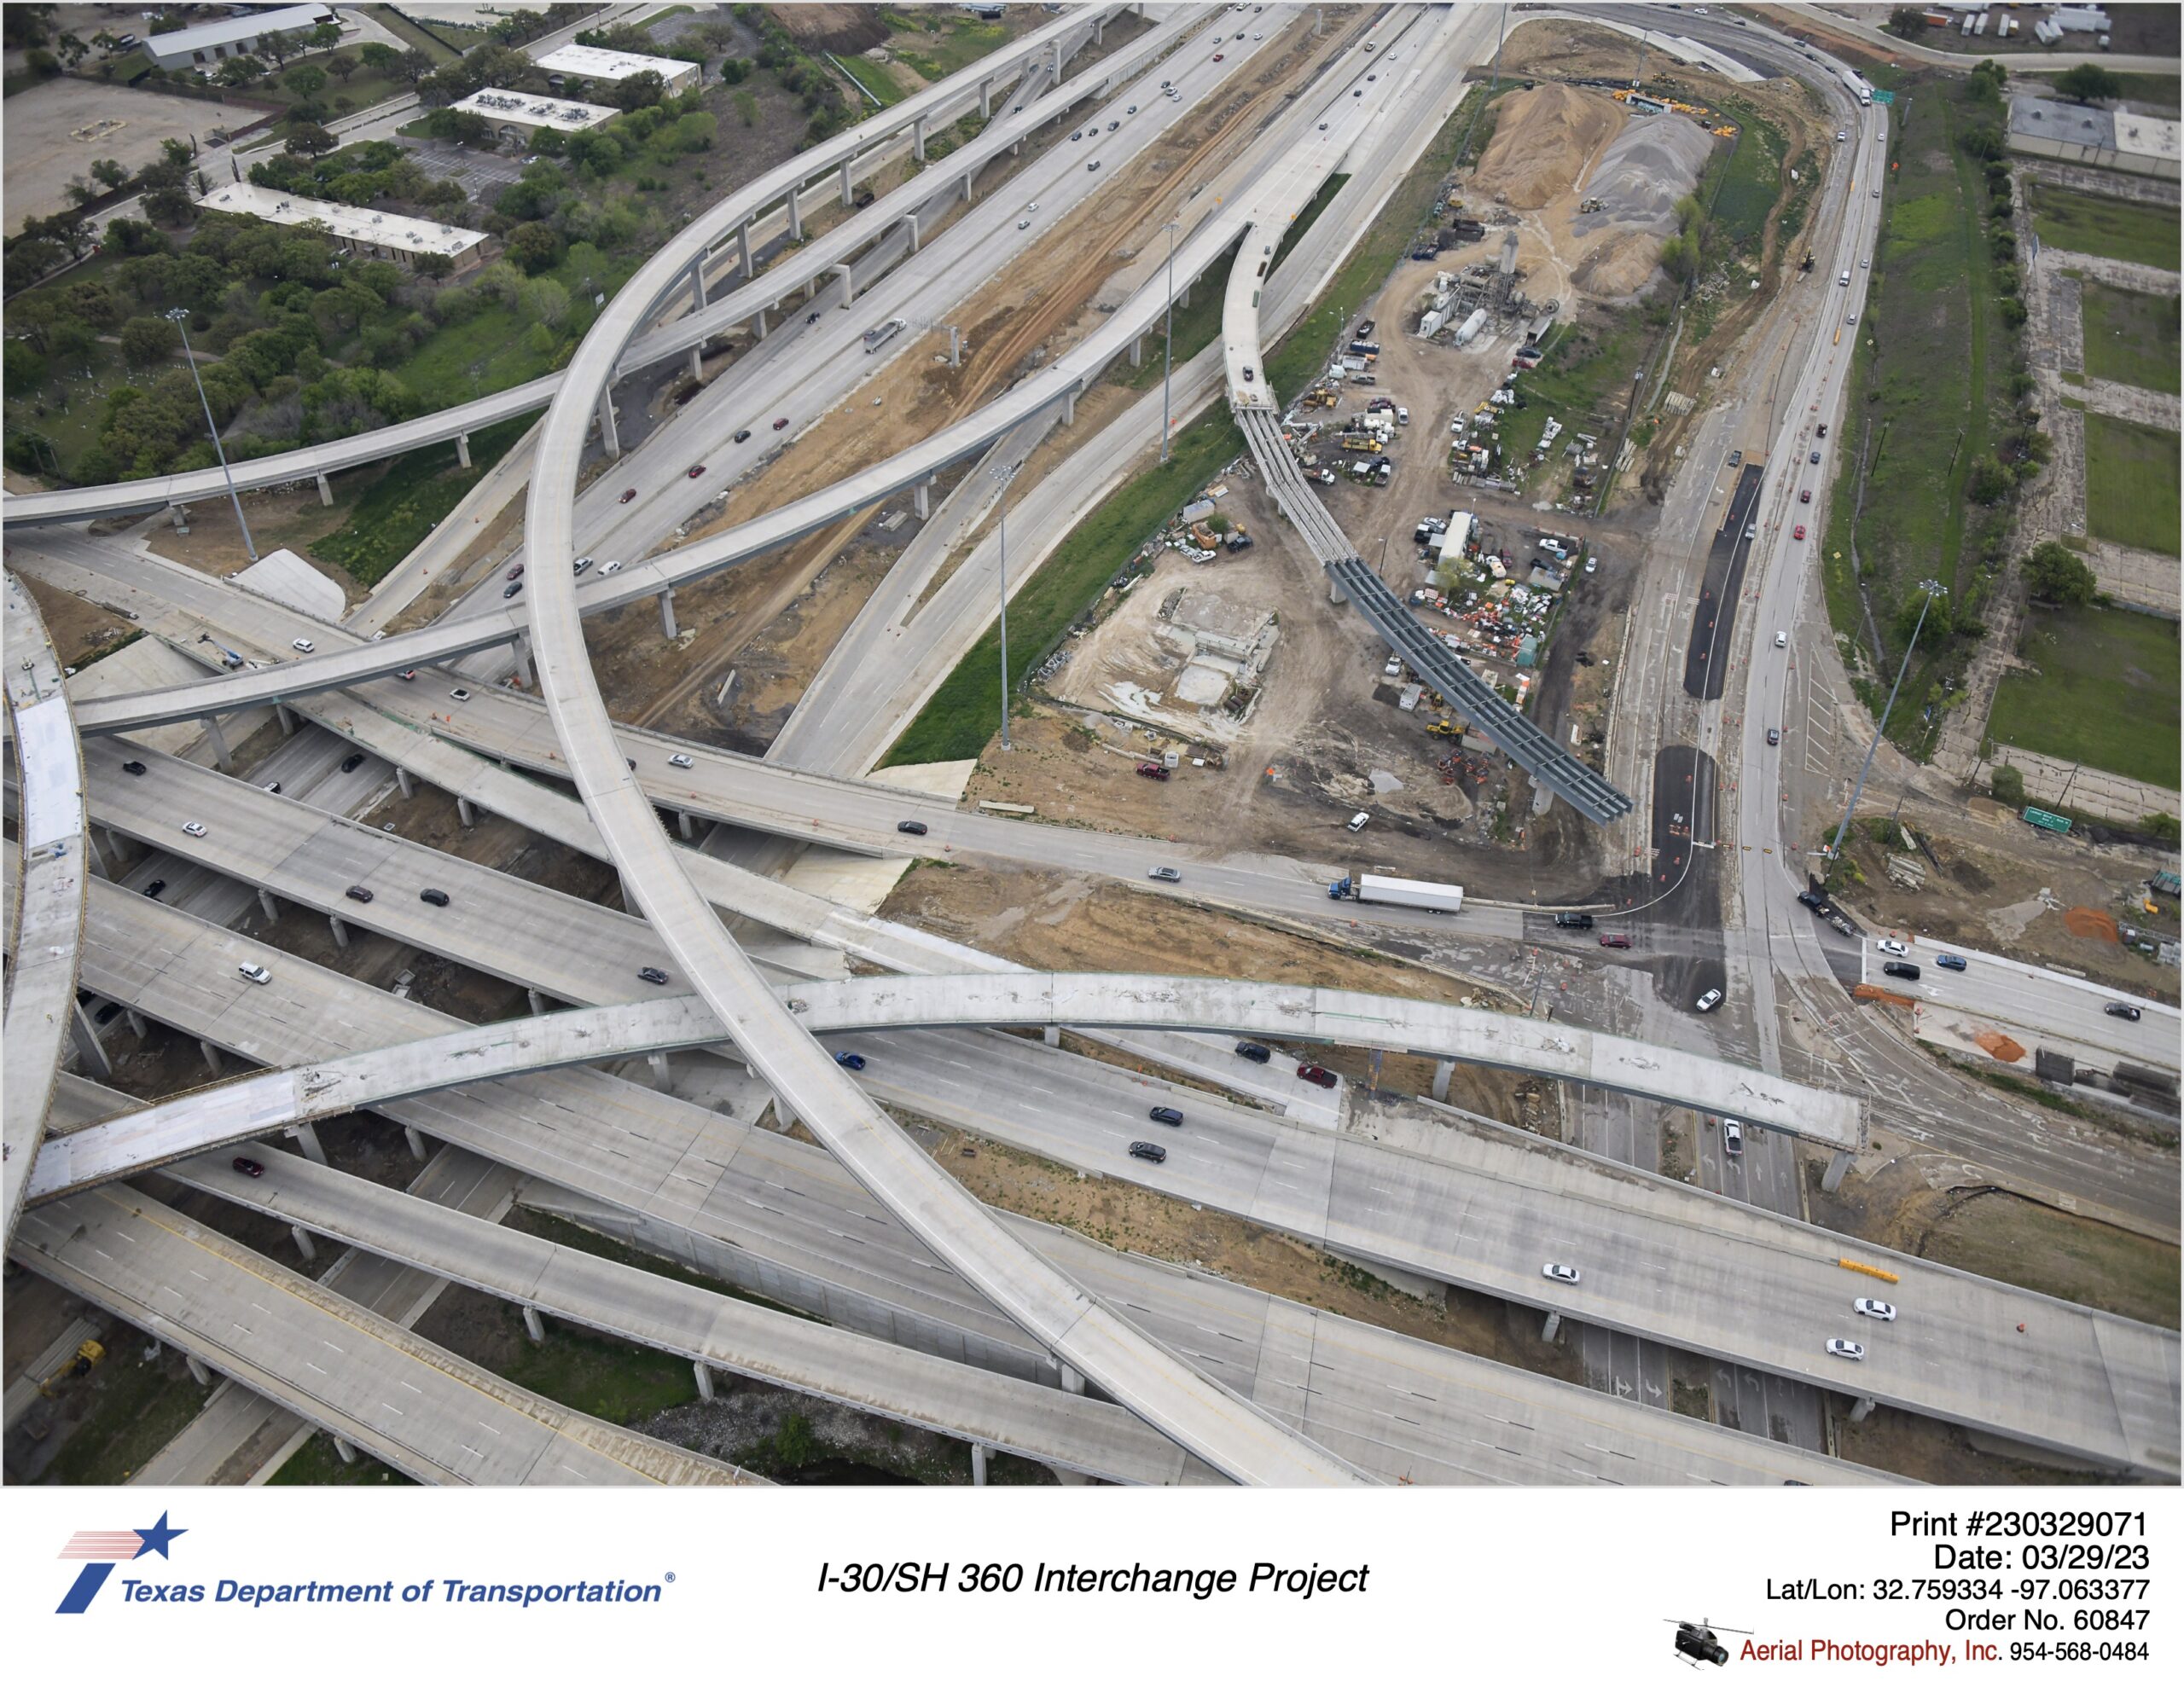 I-30 and SH 360 interchange focusing on construction of Six Flags Dr and northbound direct connector. March 2023.